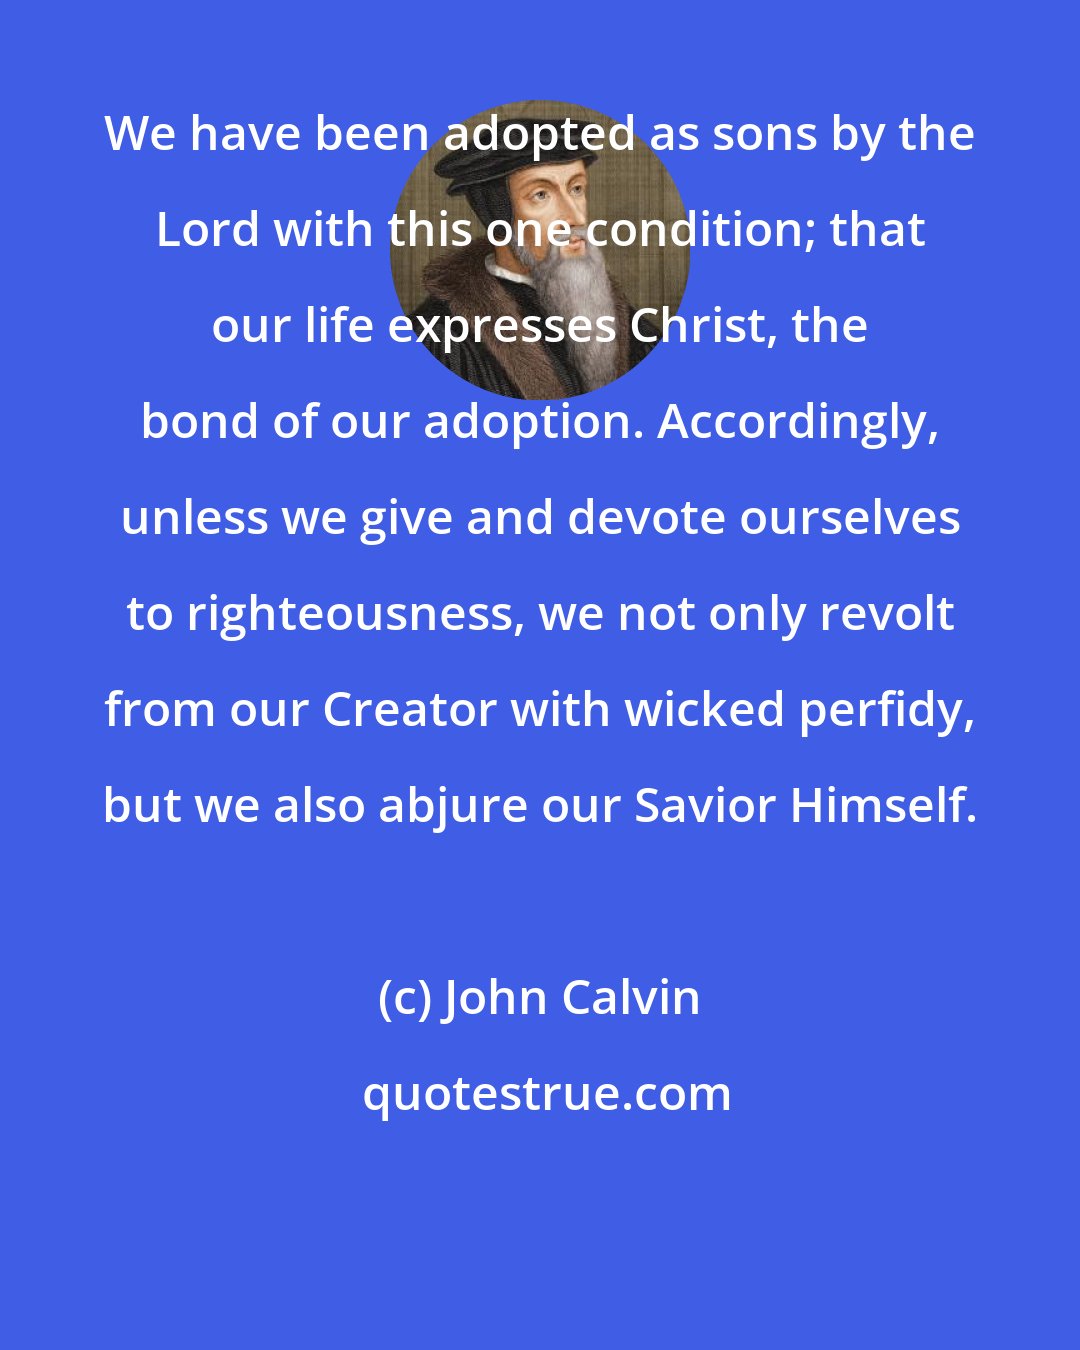 John Calvin: We have been adopted as sons by the Lord with this one condition; that our life expresses Christ, the bond of our adoption. Accordingly, unless we give and devote ourselves to righteousness, we not only revolt from our Creator with wicked perfidy, but we also abjure our Savior Himself.